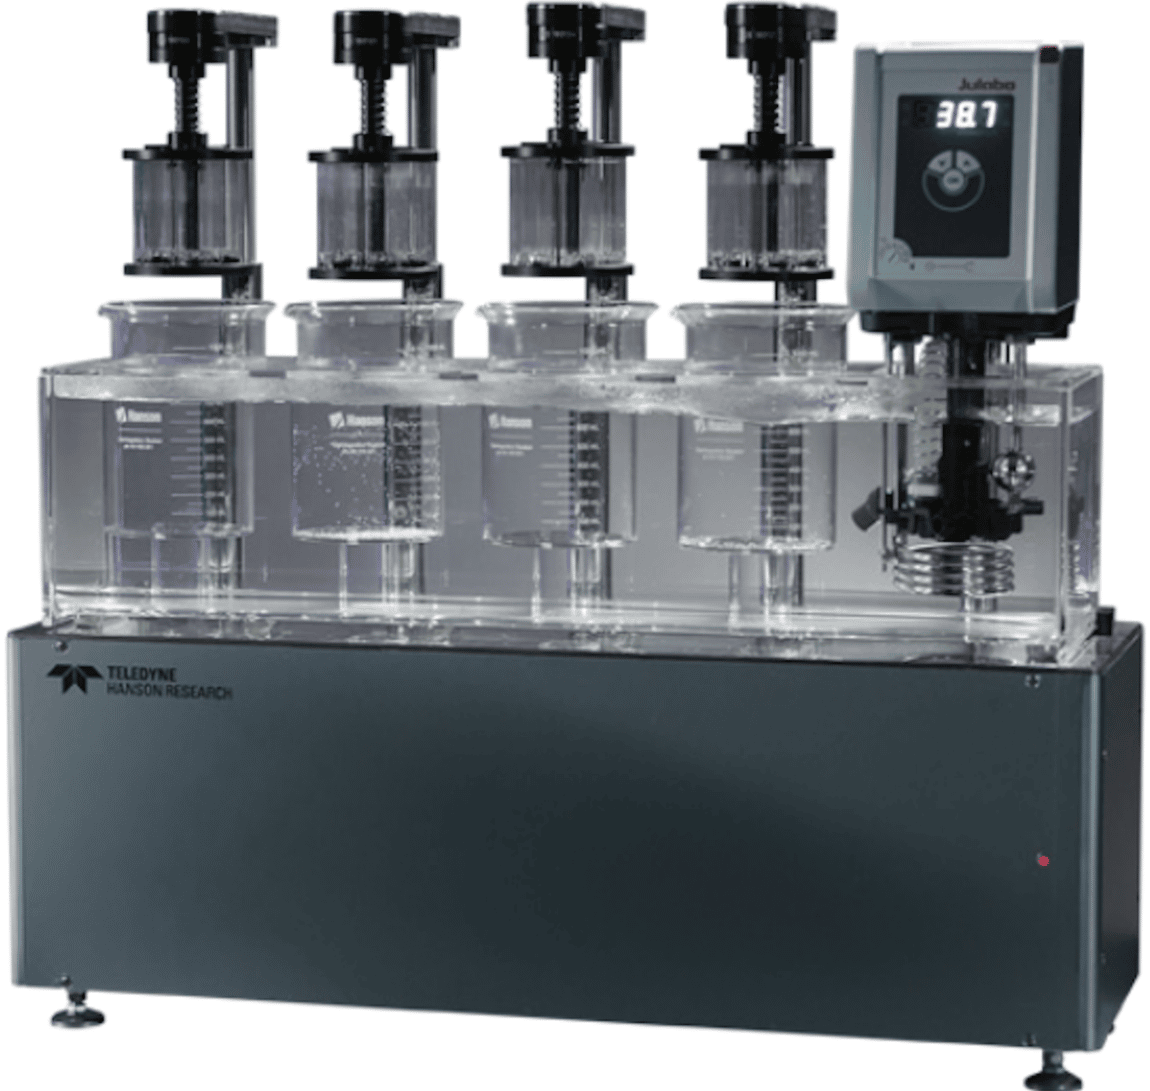 The Disi AutoSense™ from Teledyne Hanson Research delivers fully automated disintegration testing in compliance with USP  and  and their harmonized EP and JP methods. Designed for precision, productivity, and ease-of-use, the Disi AutoSense provides a fast, low- maintenance solution for disintegration labs conducting tests in new product development and batch/lot manufacturing facilities.